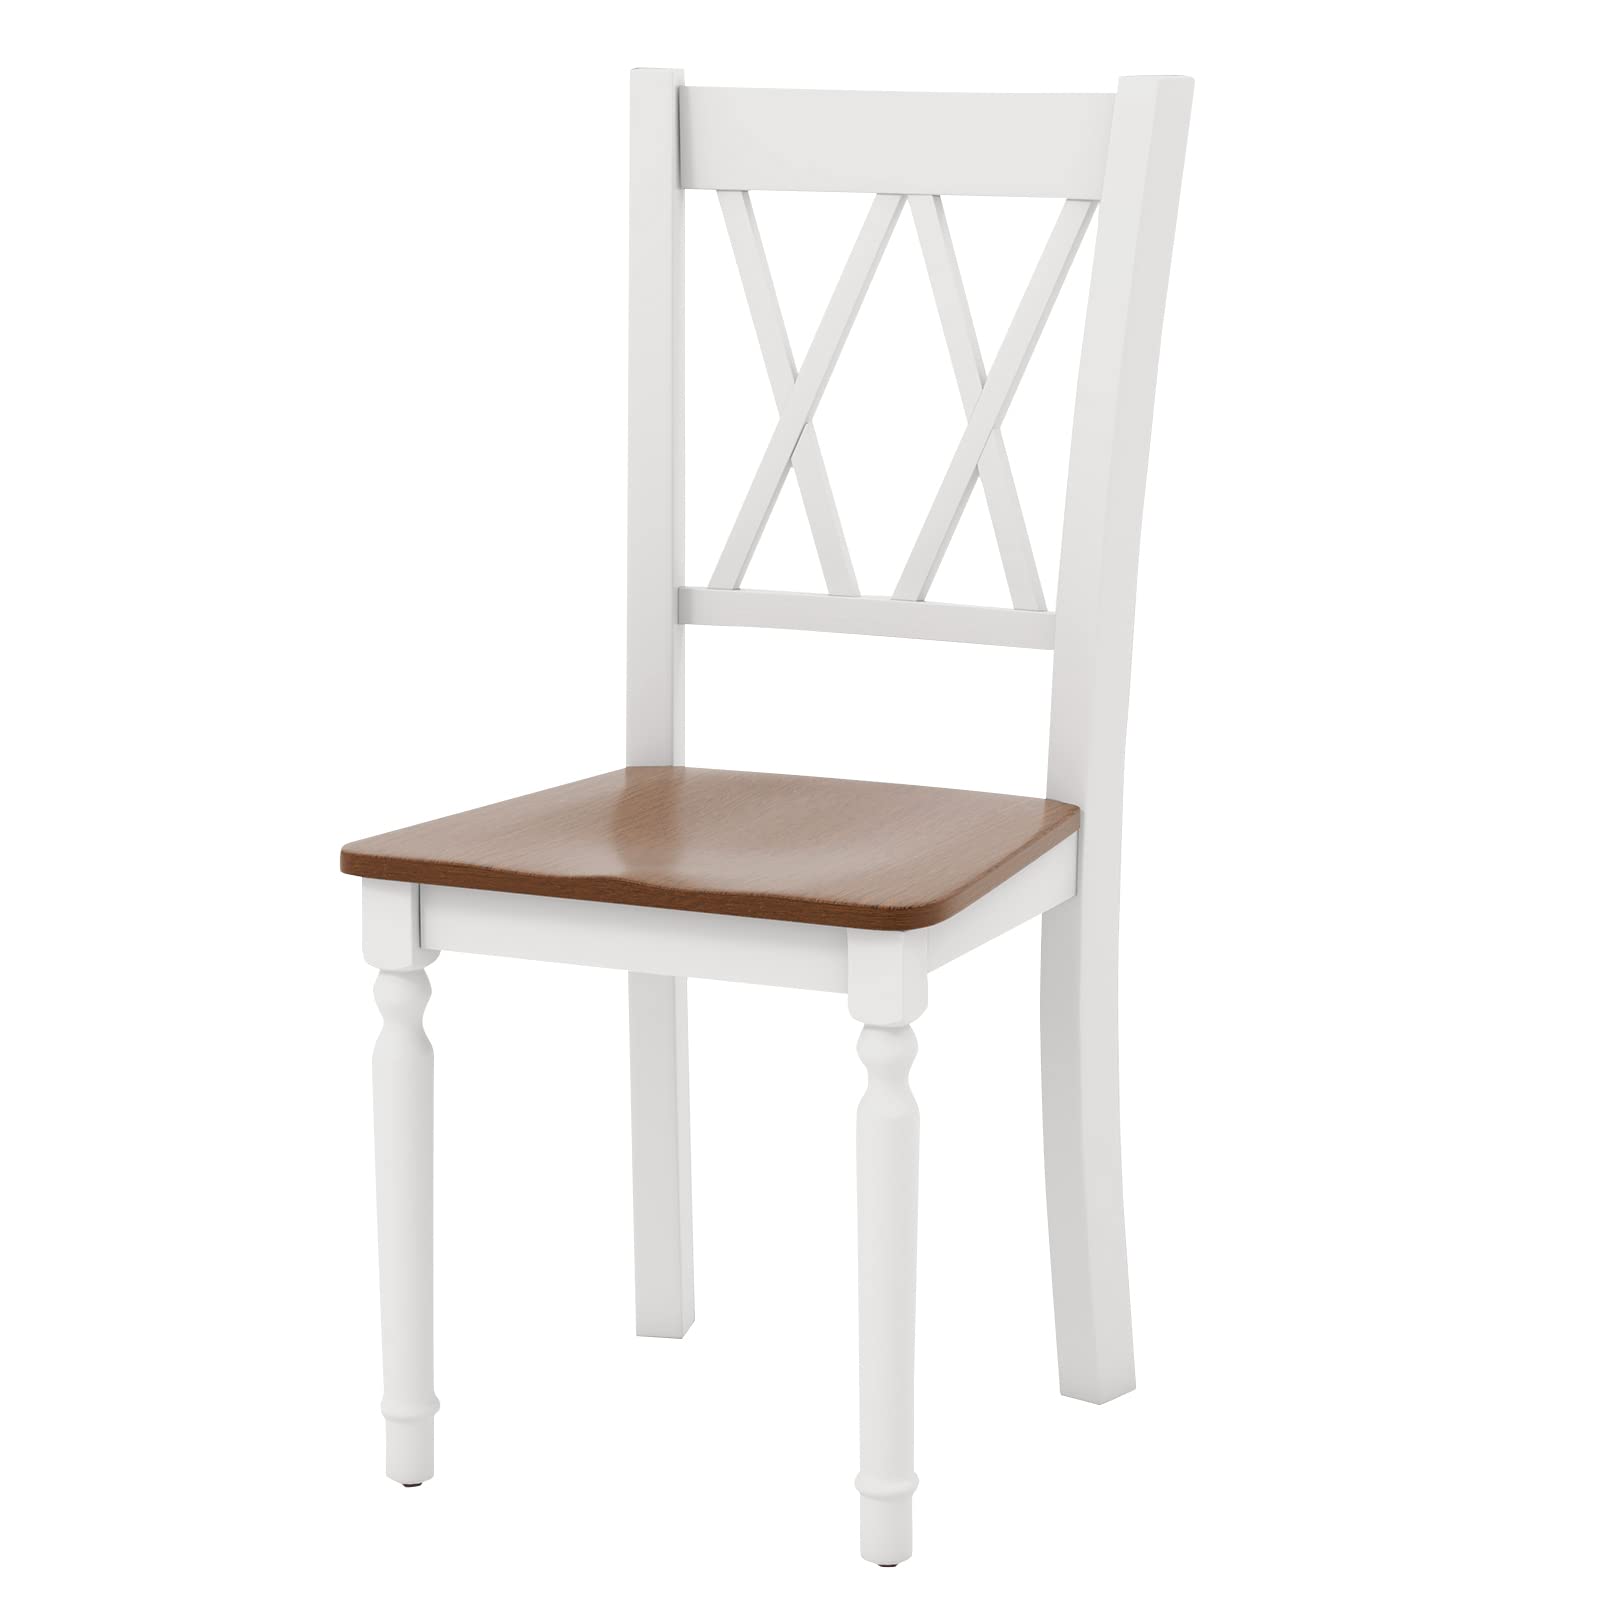 Giantex Dining Room Chairs Set of 4 White - Wooden Farmhouse Kitchen Chairs with Rubber Wood Seat